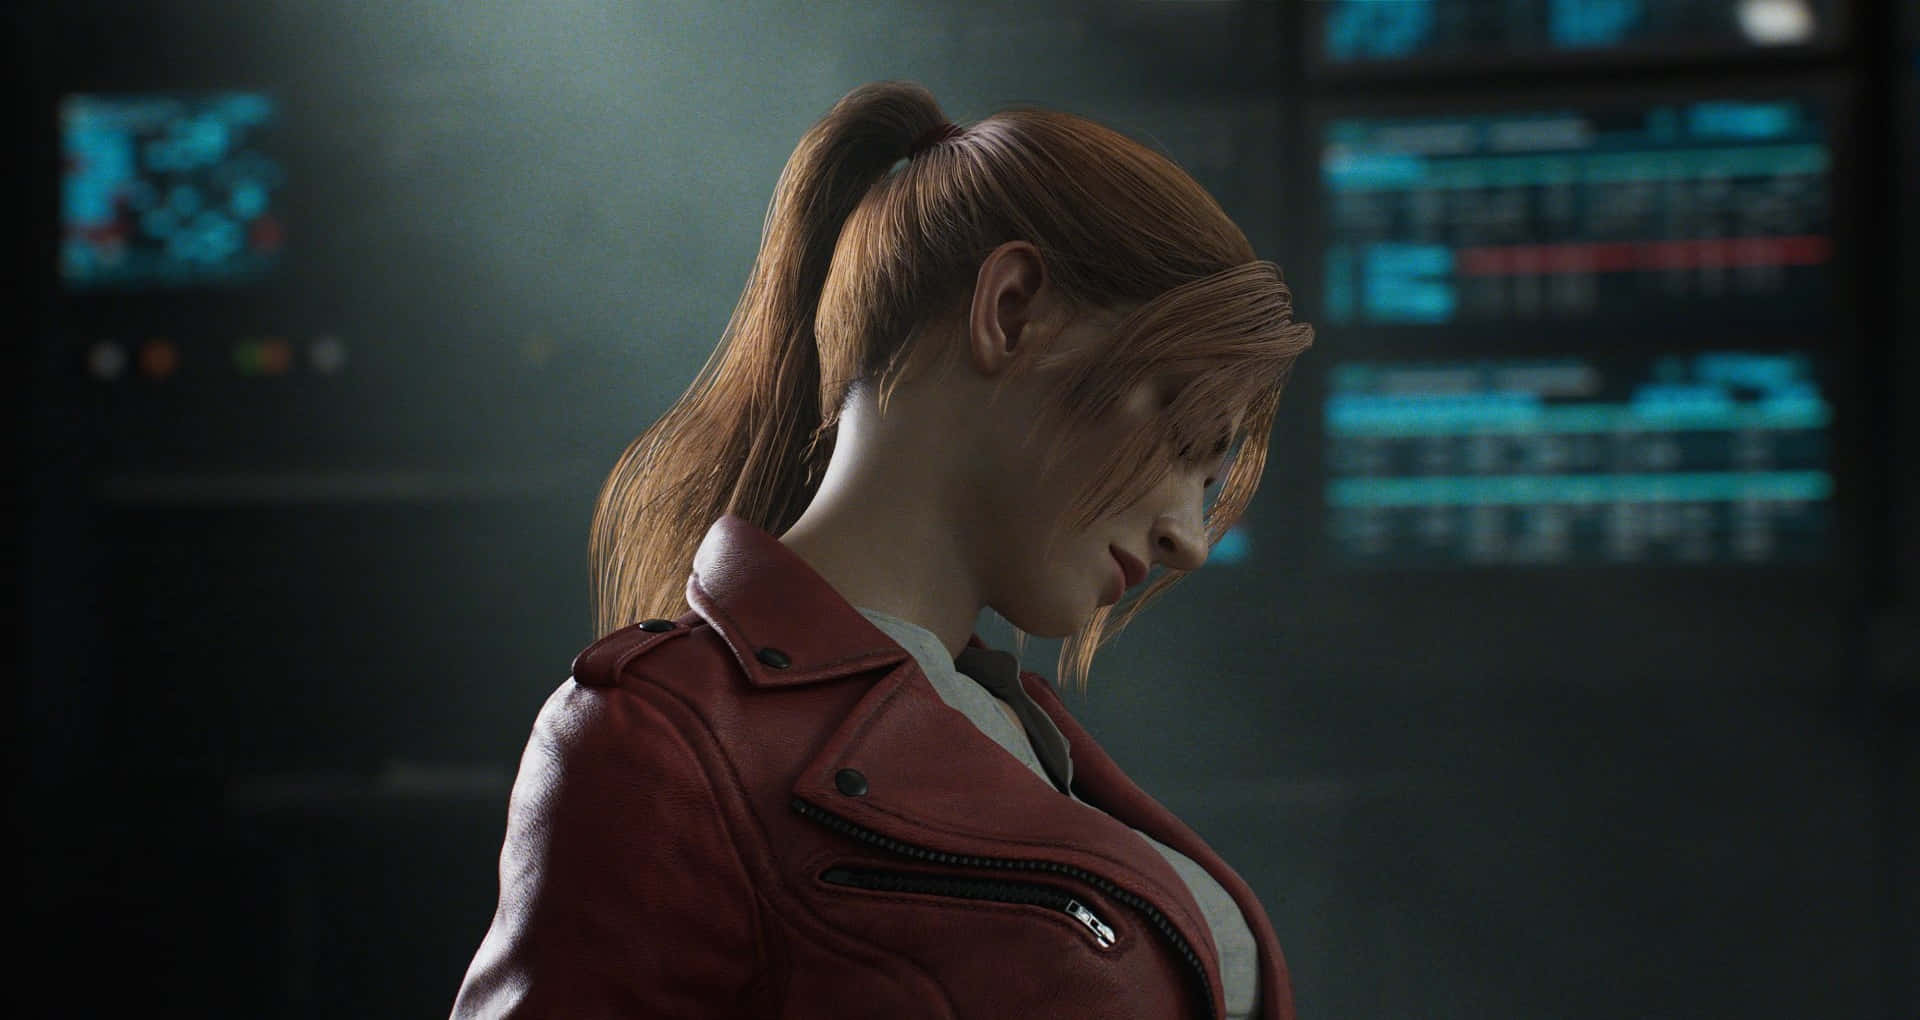 Action Ready Claire Redfield From Capcom's Resident Evil Franchise Wallpaper